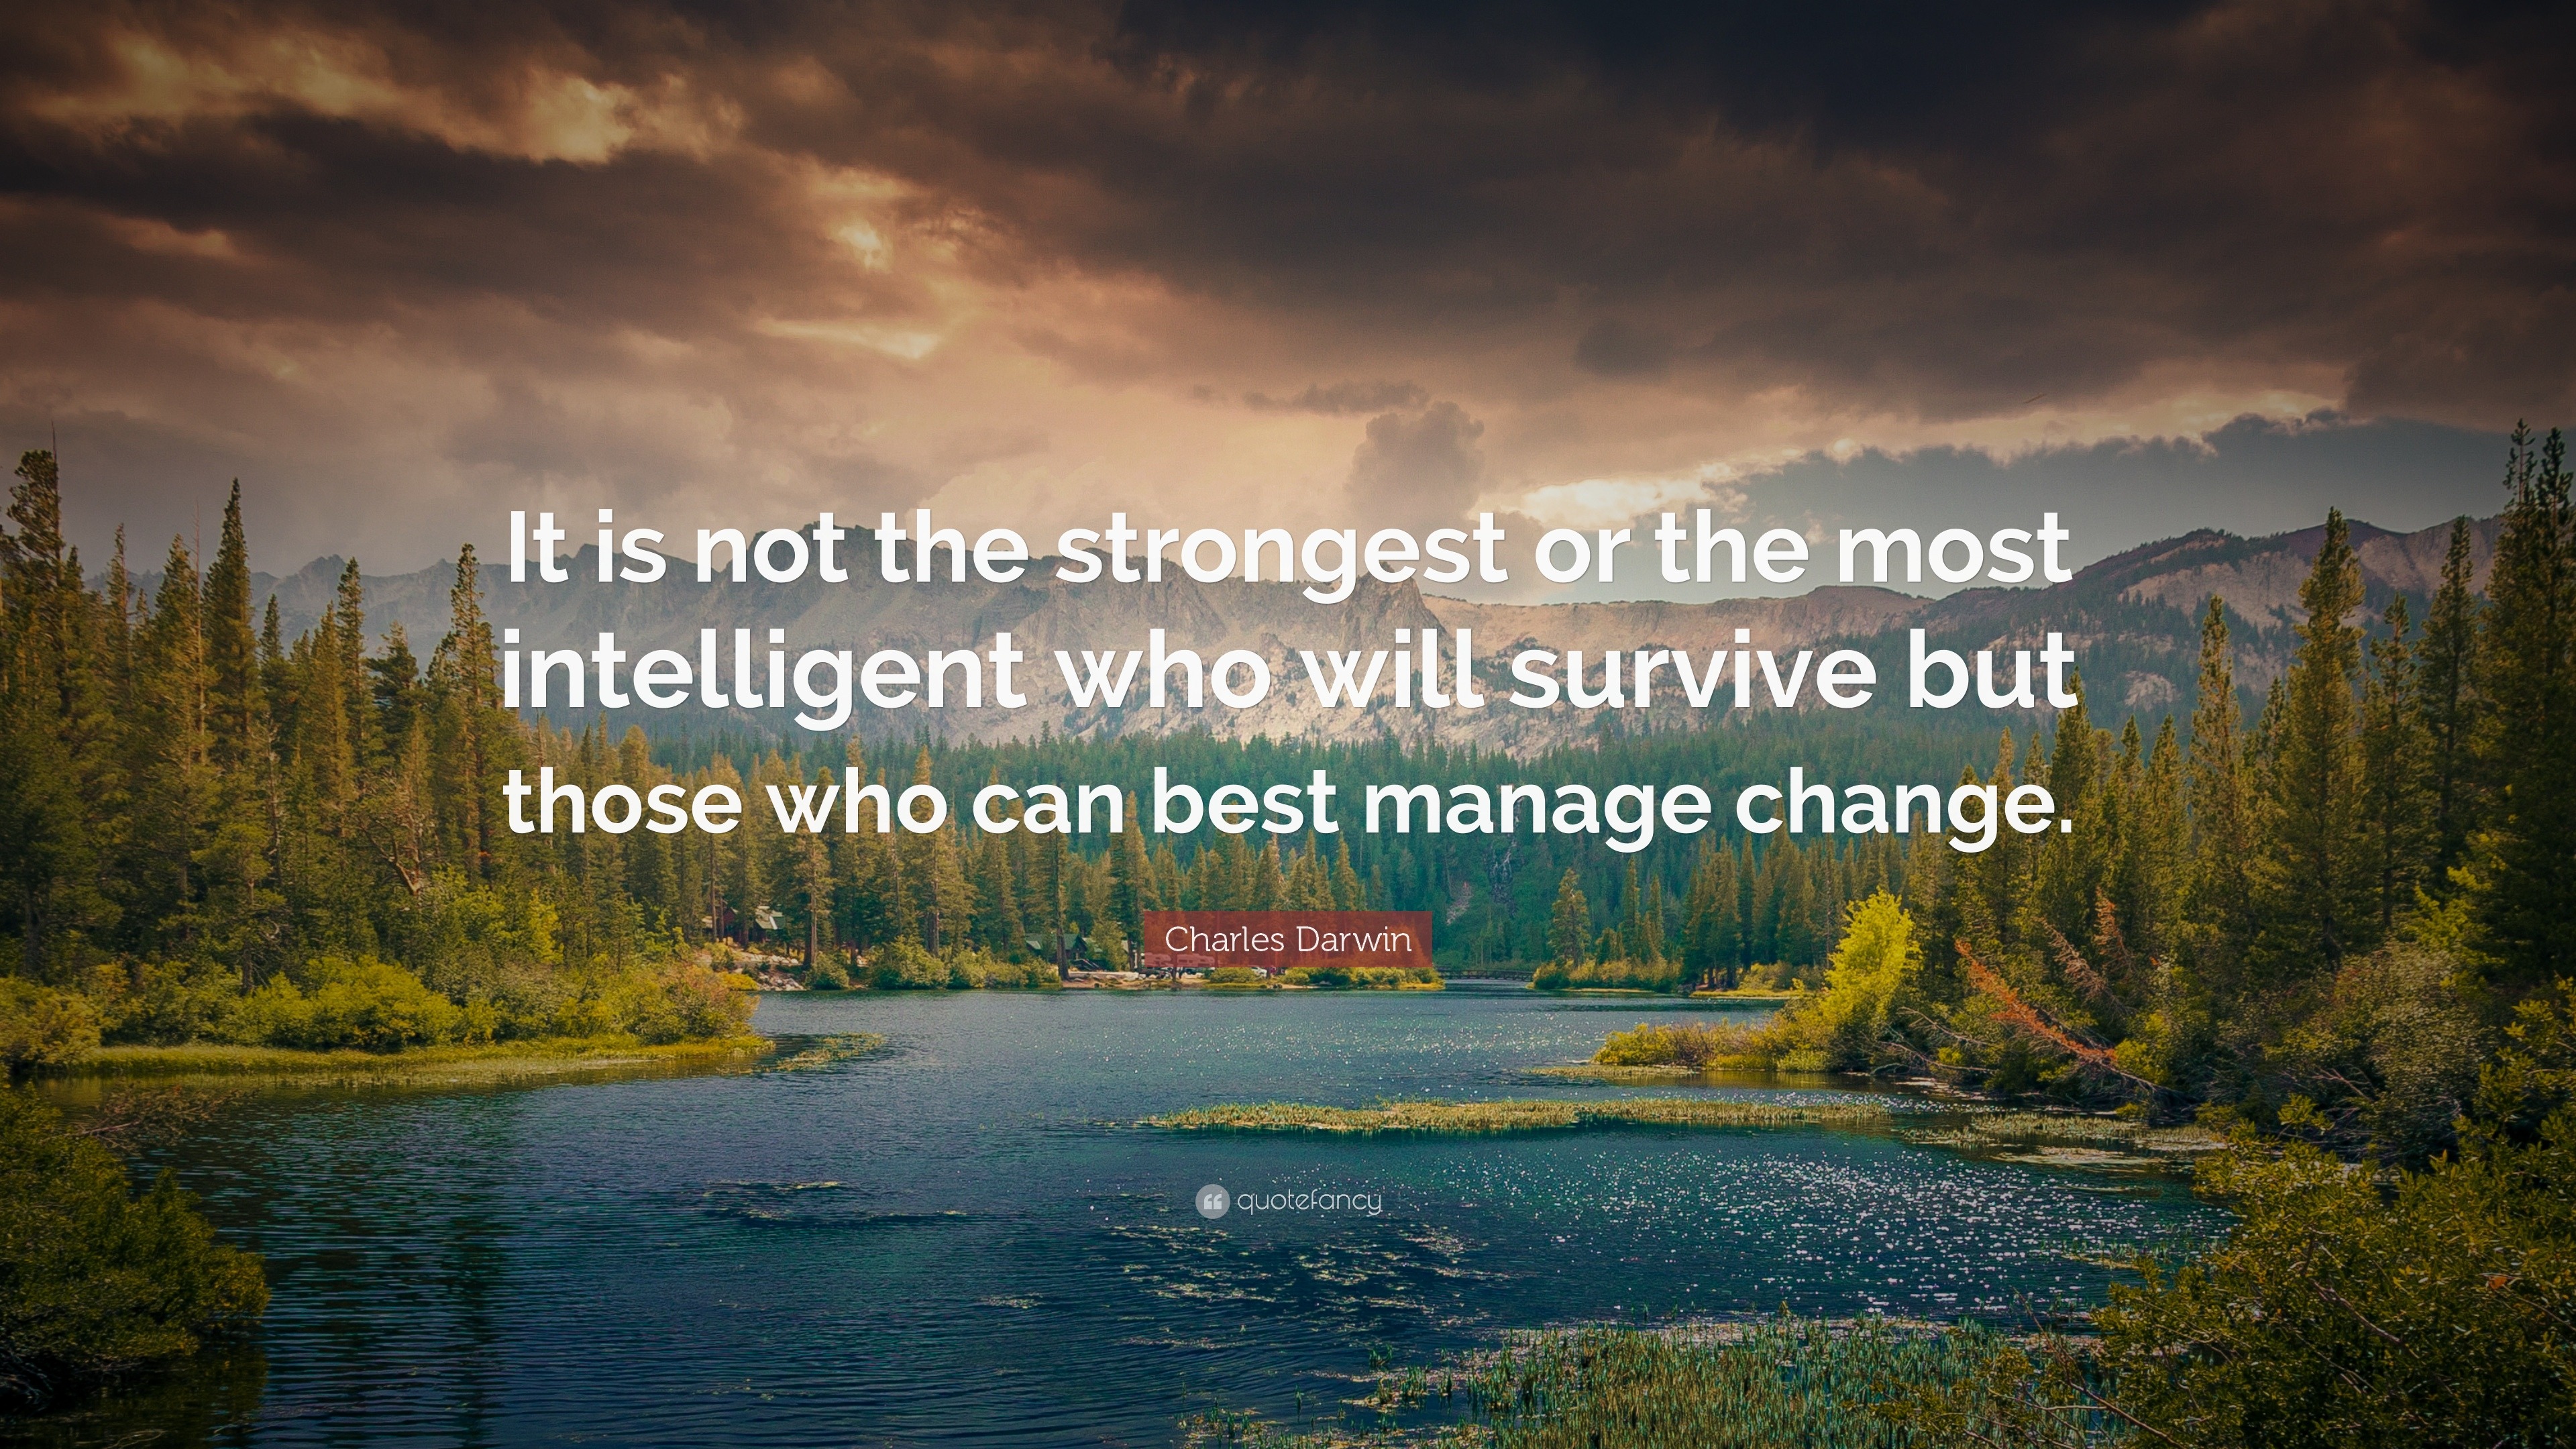 Charles Darwin Quote: “It is not the strongest or the most intelligent